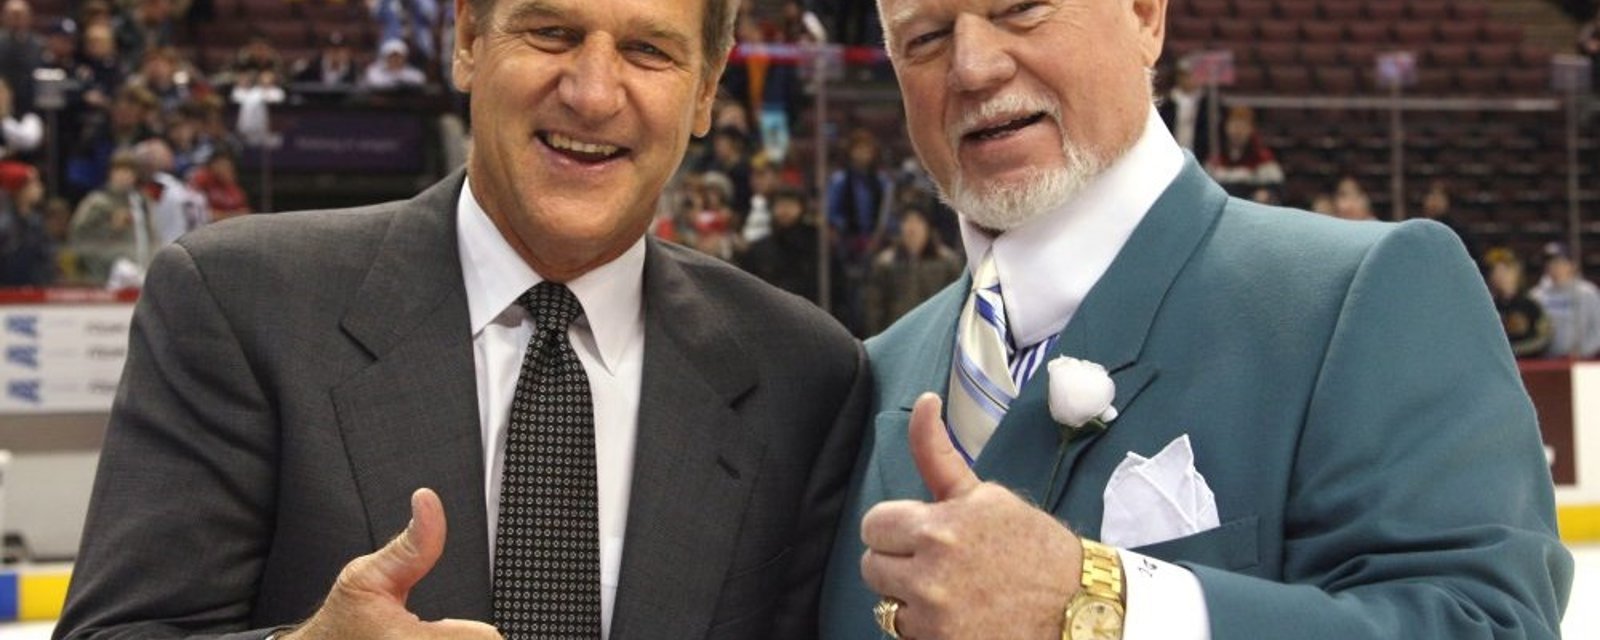 NHL legend Bobby Orr goes off on the firing on Don Cherry, calls it “disgusting” and “disgraceful.”